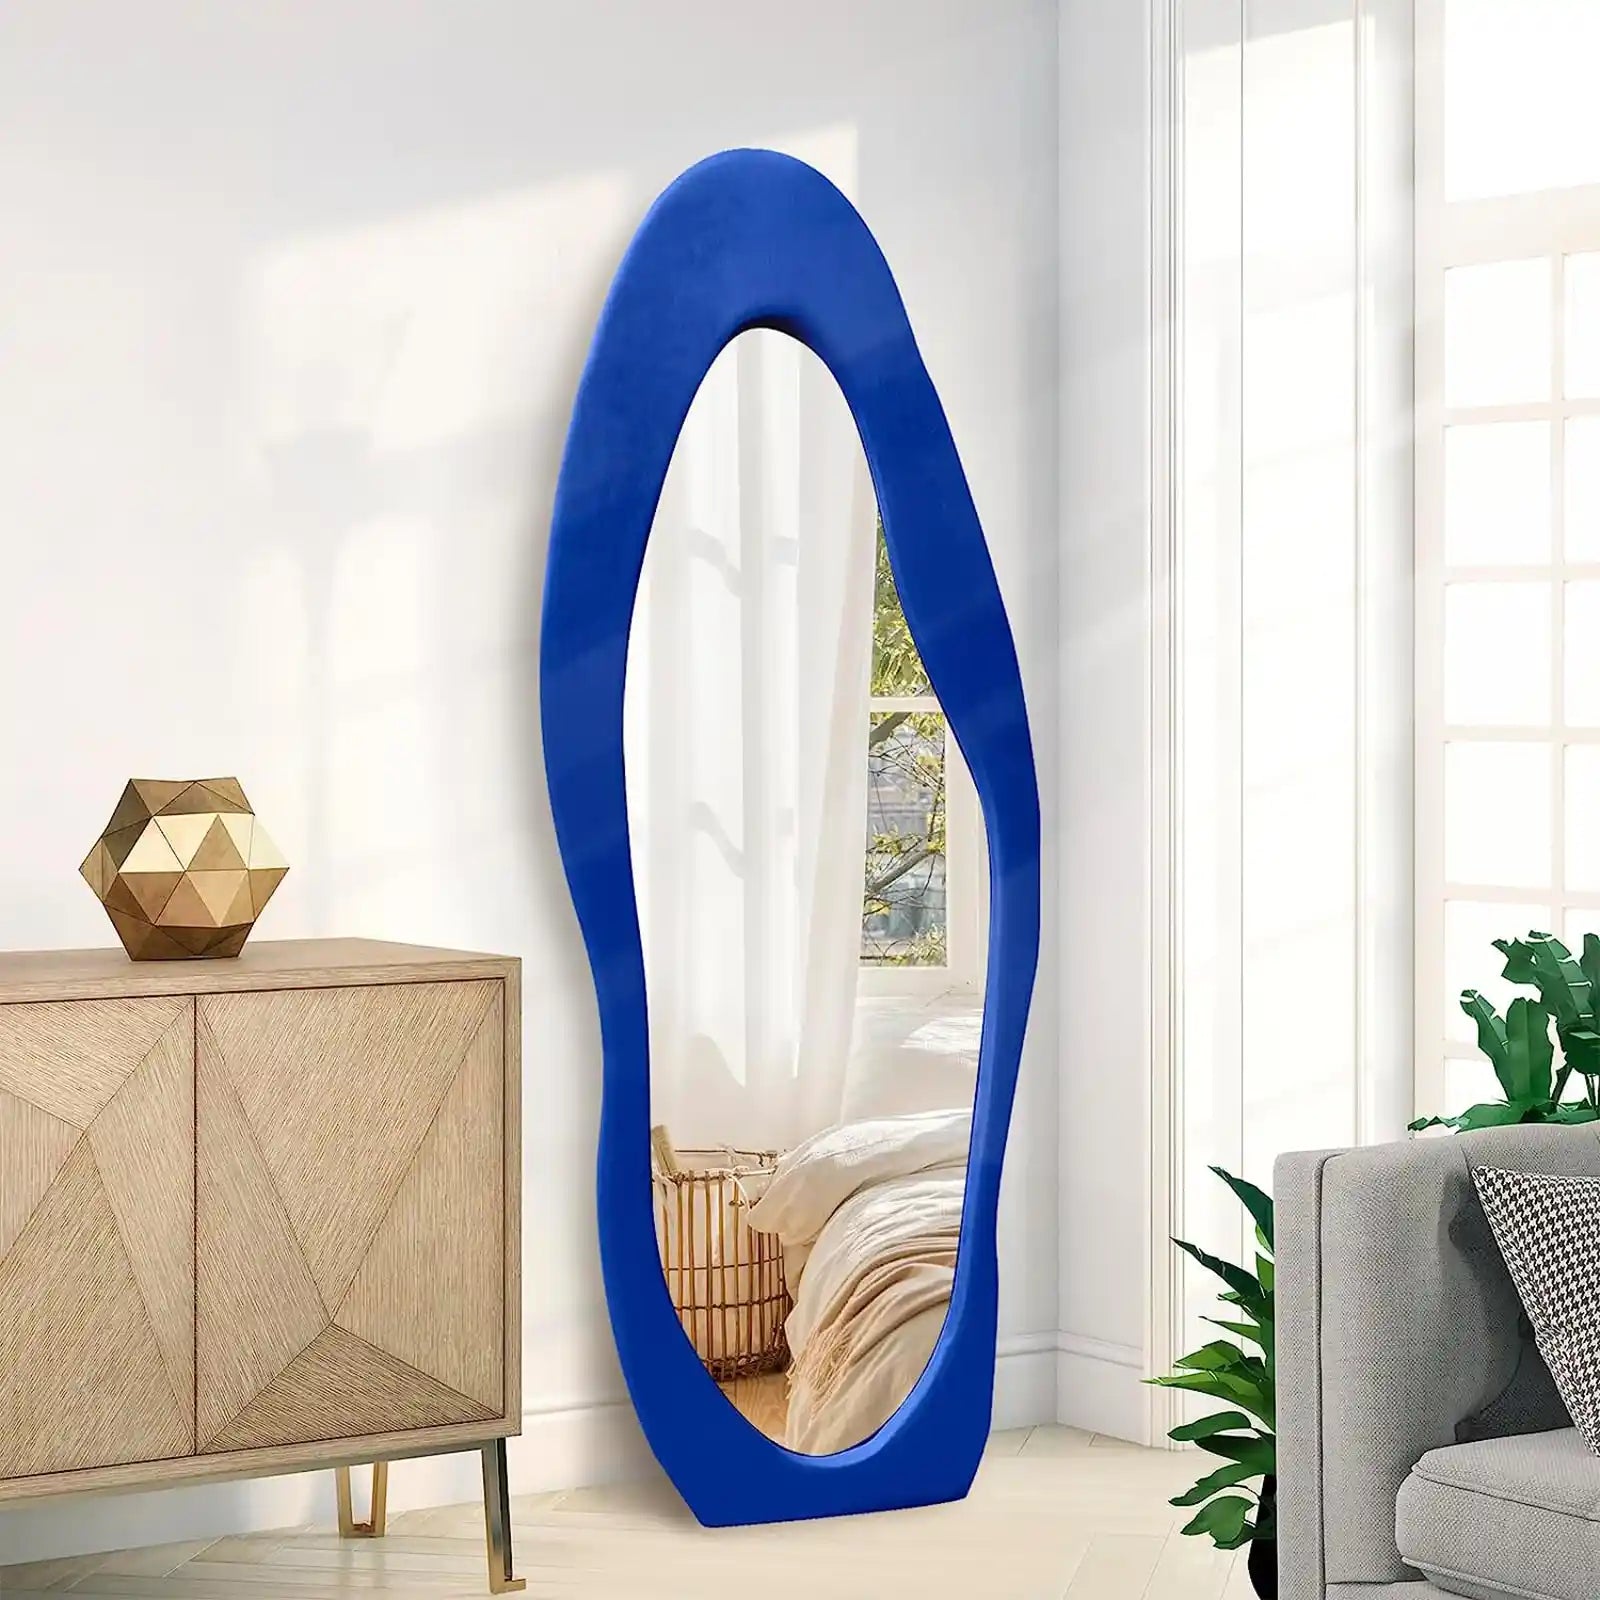 Irregular Full Length Mirror 63"x24", Flannel Wrapped Wooden Frame Full Body Mirror, Floor Mirror Full Length, Wavy Mirror Hanging or Leaning Against Wall for Cloakroom/Bedroom/Living Room